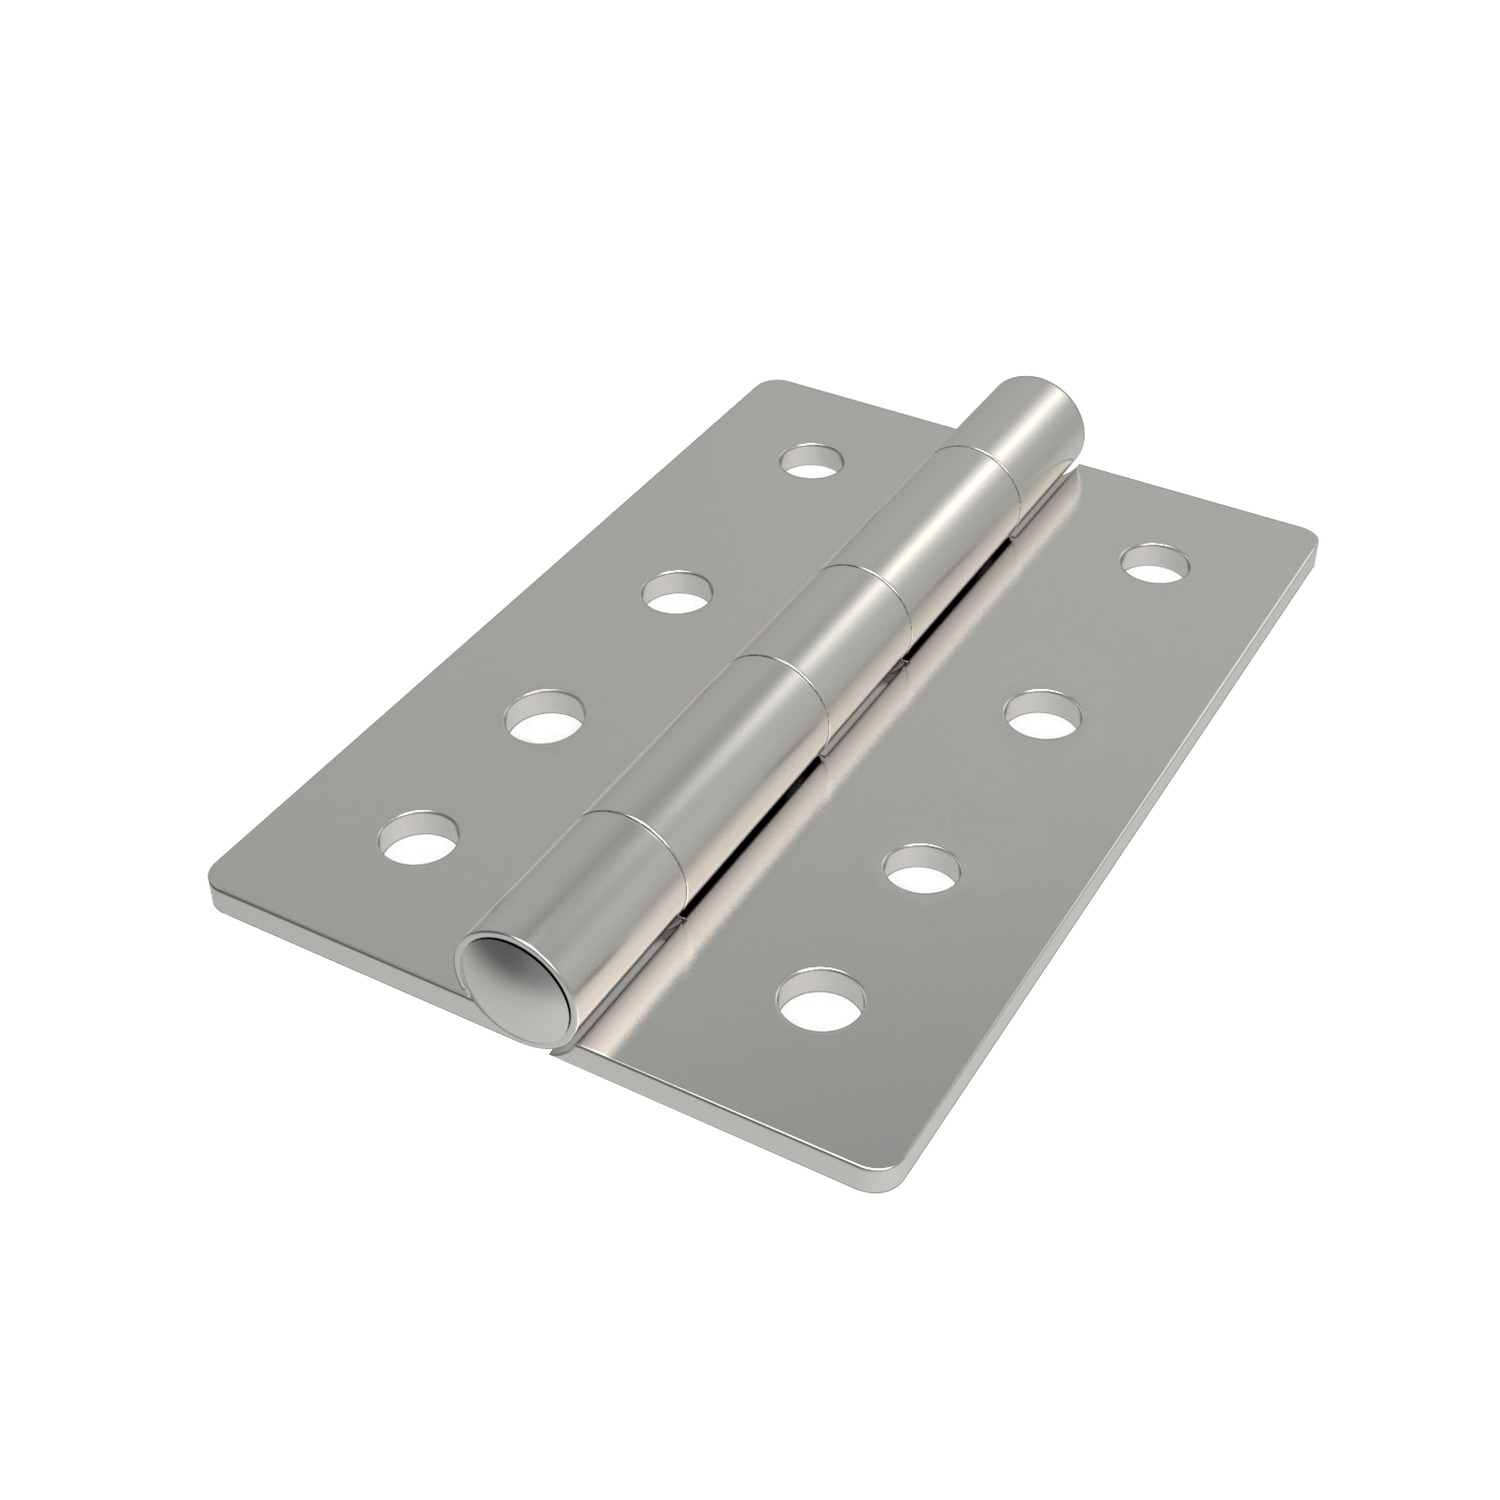 Product S0780, Surface Mount - Leaf Hinge screw mount - stainless steel / 